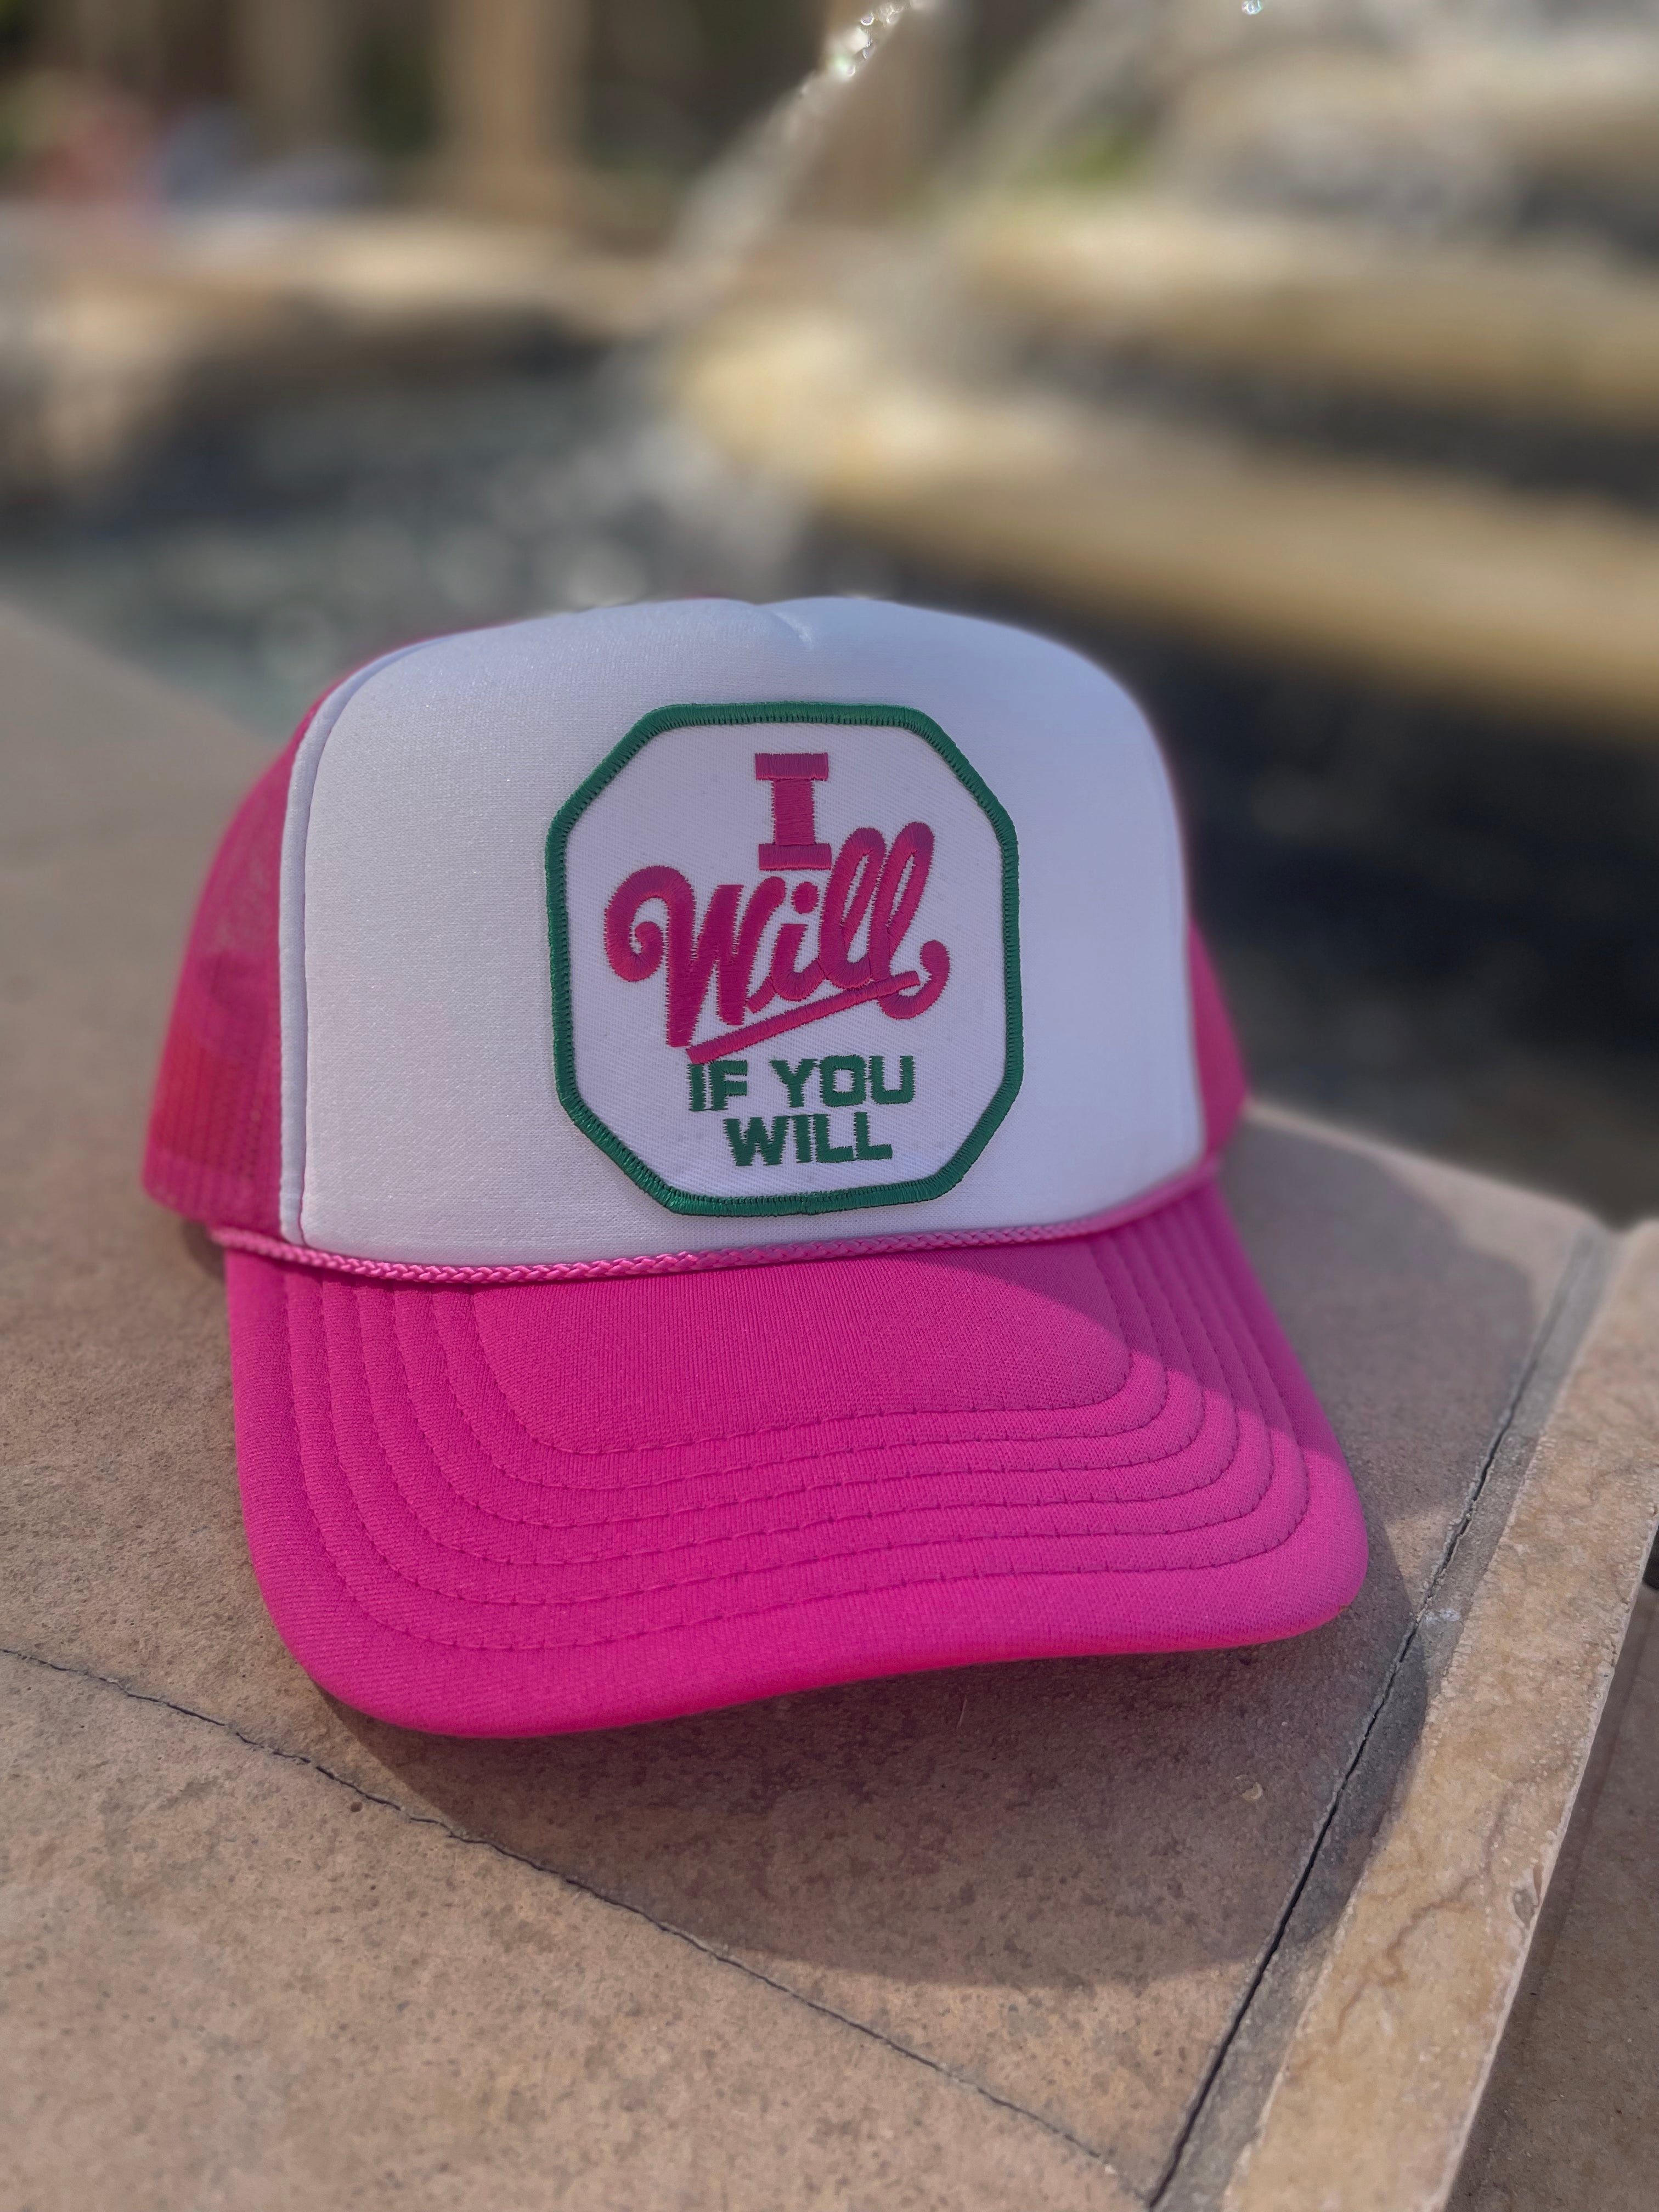 I Will if You Will Trucker Hat